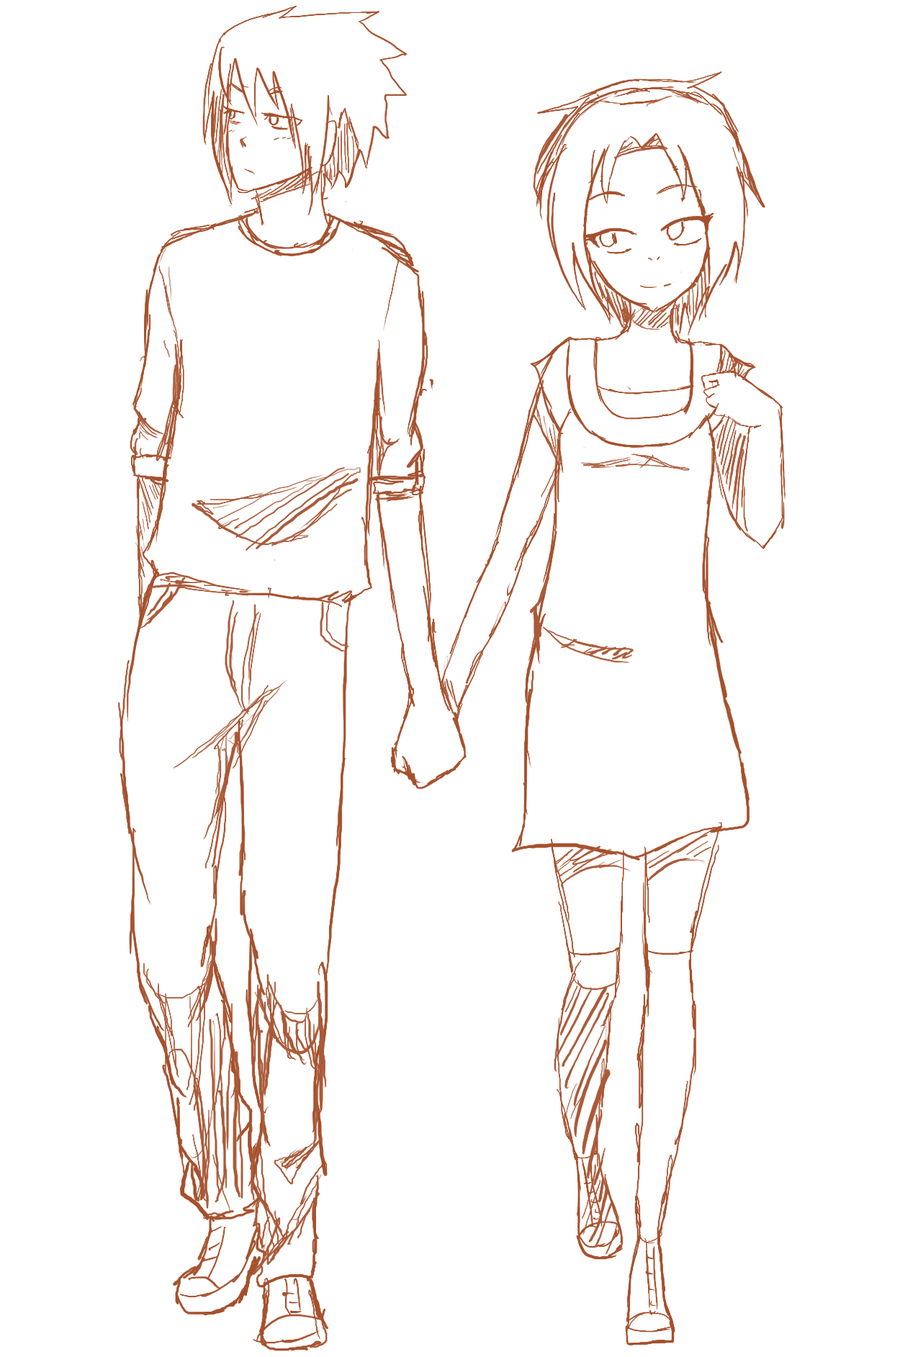 Cute Anime Couple Holding Hands Drawing Image